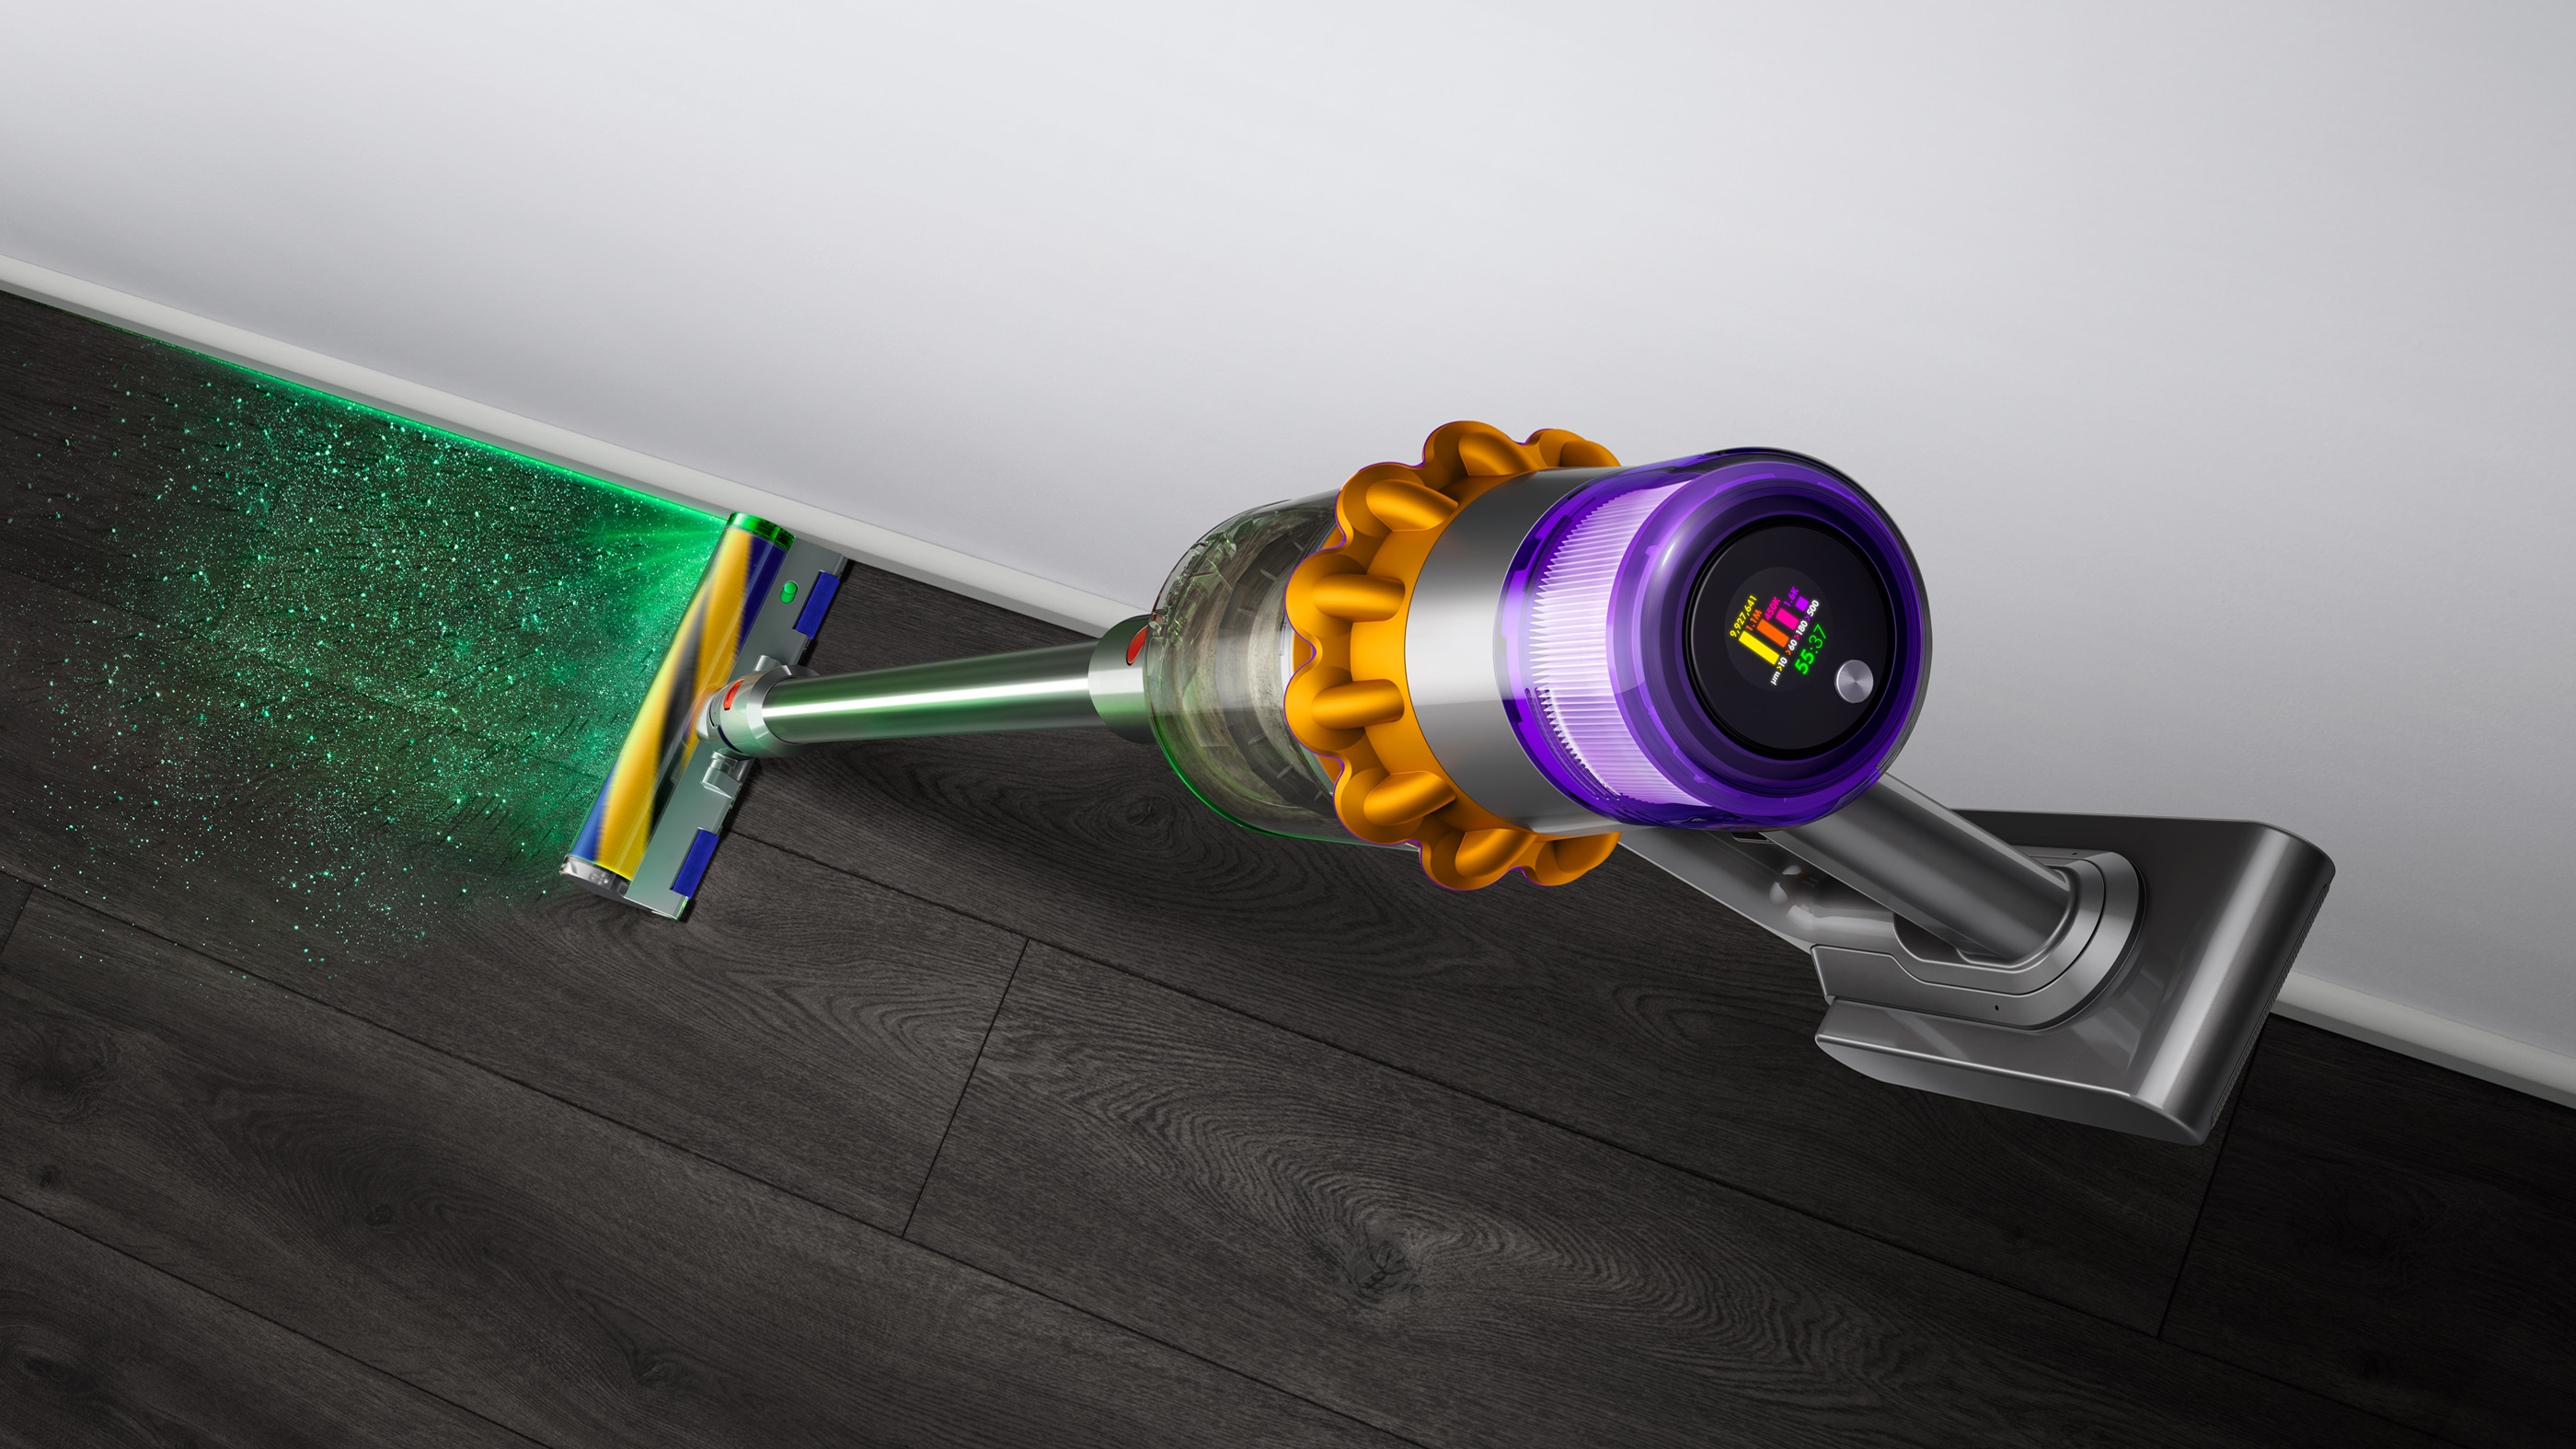 A top view of the Dyson V15 Detect